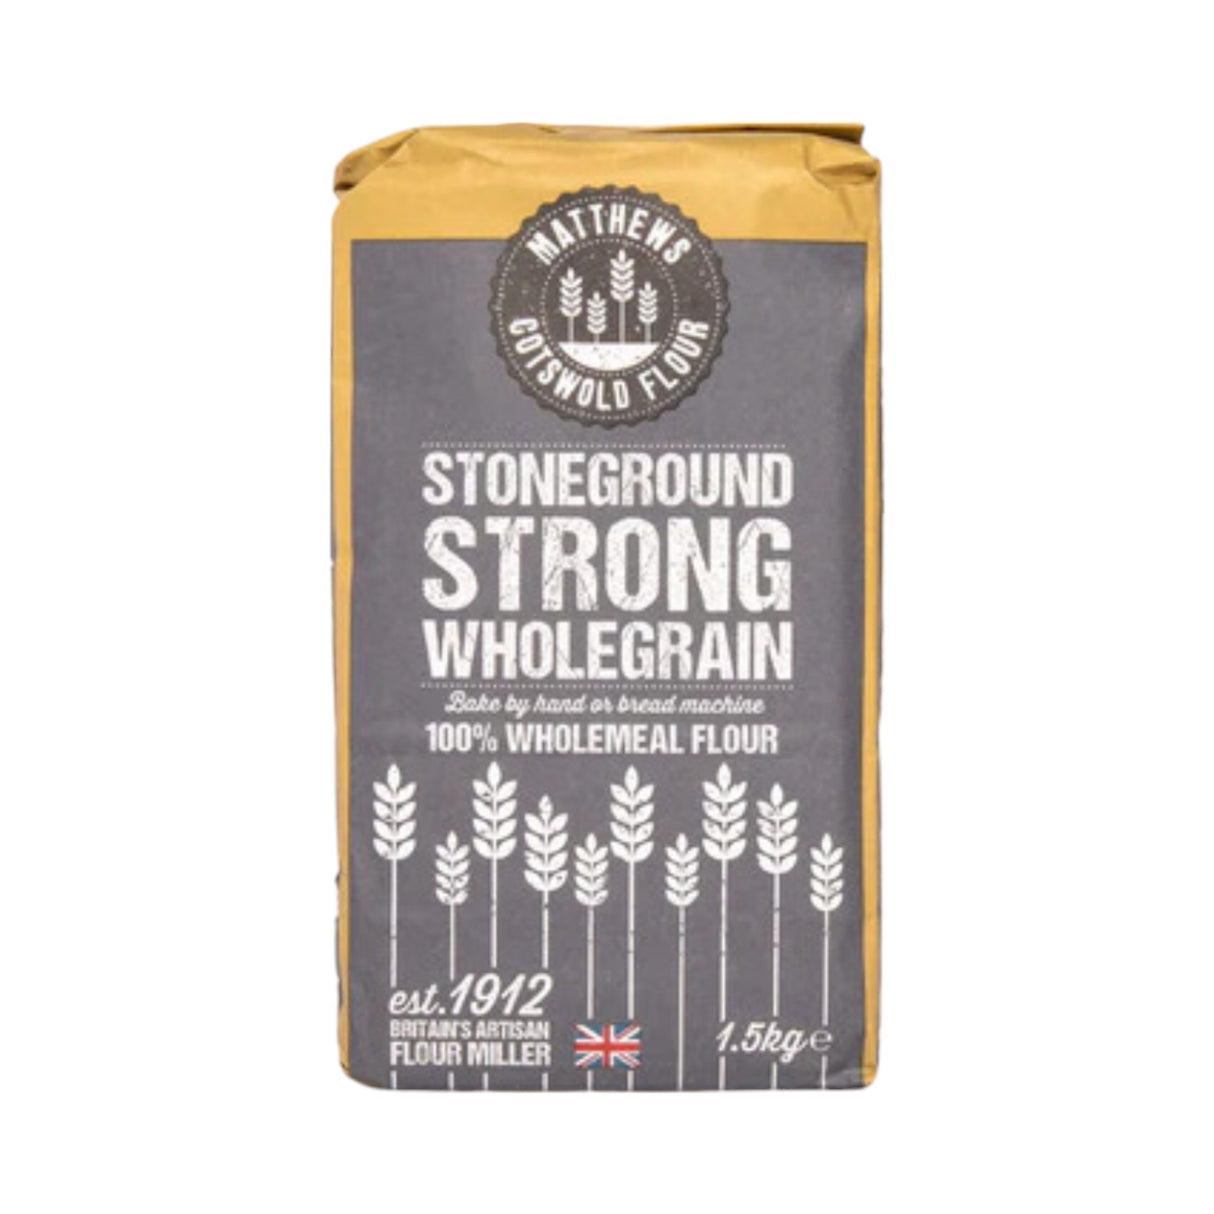 Matthews - Cotswold Traditional Stoneground Wholemeal Flour 1.5kg